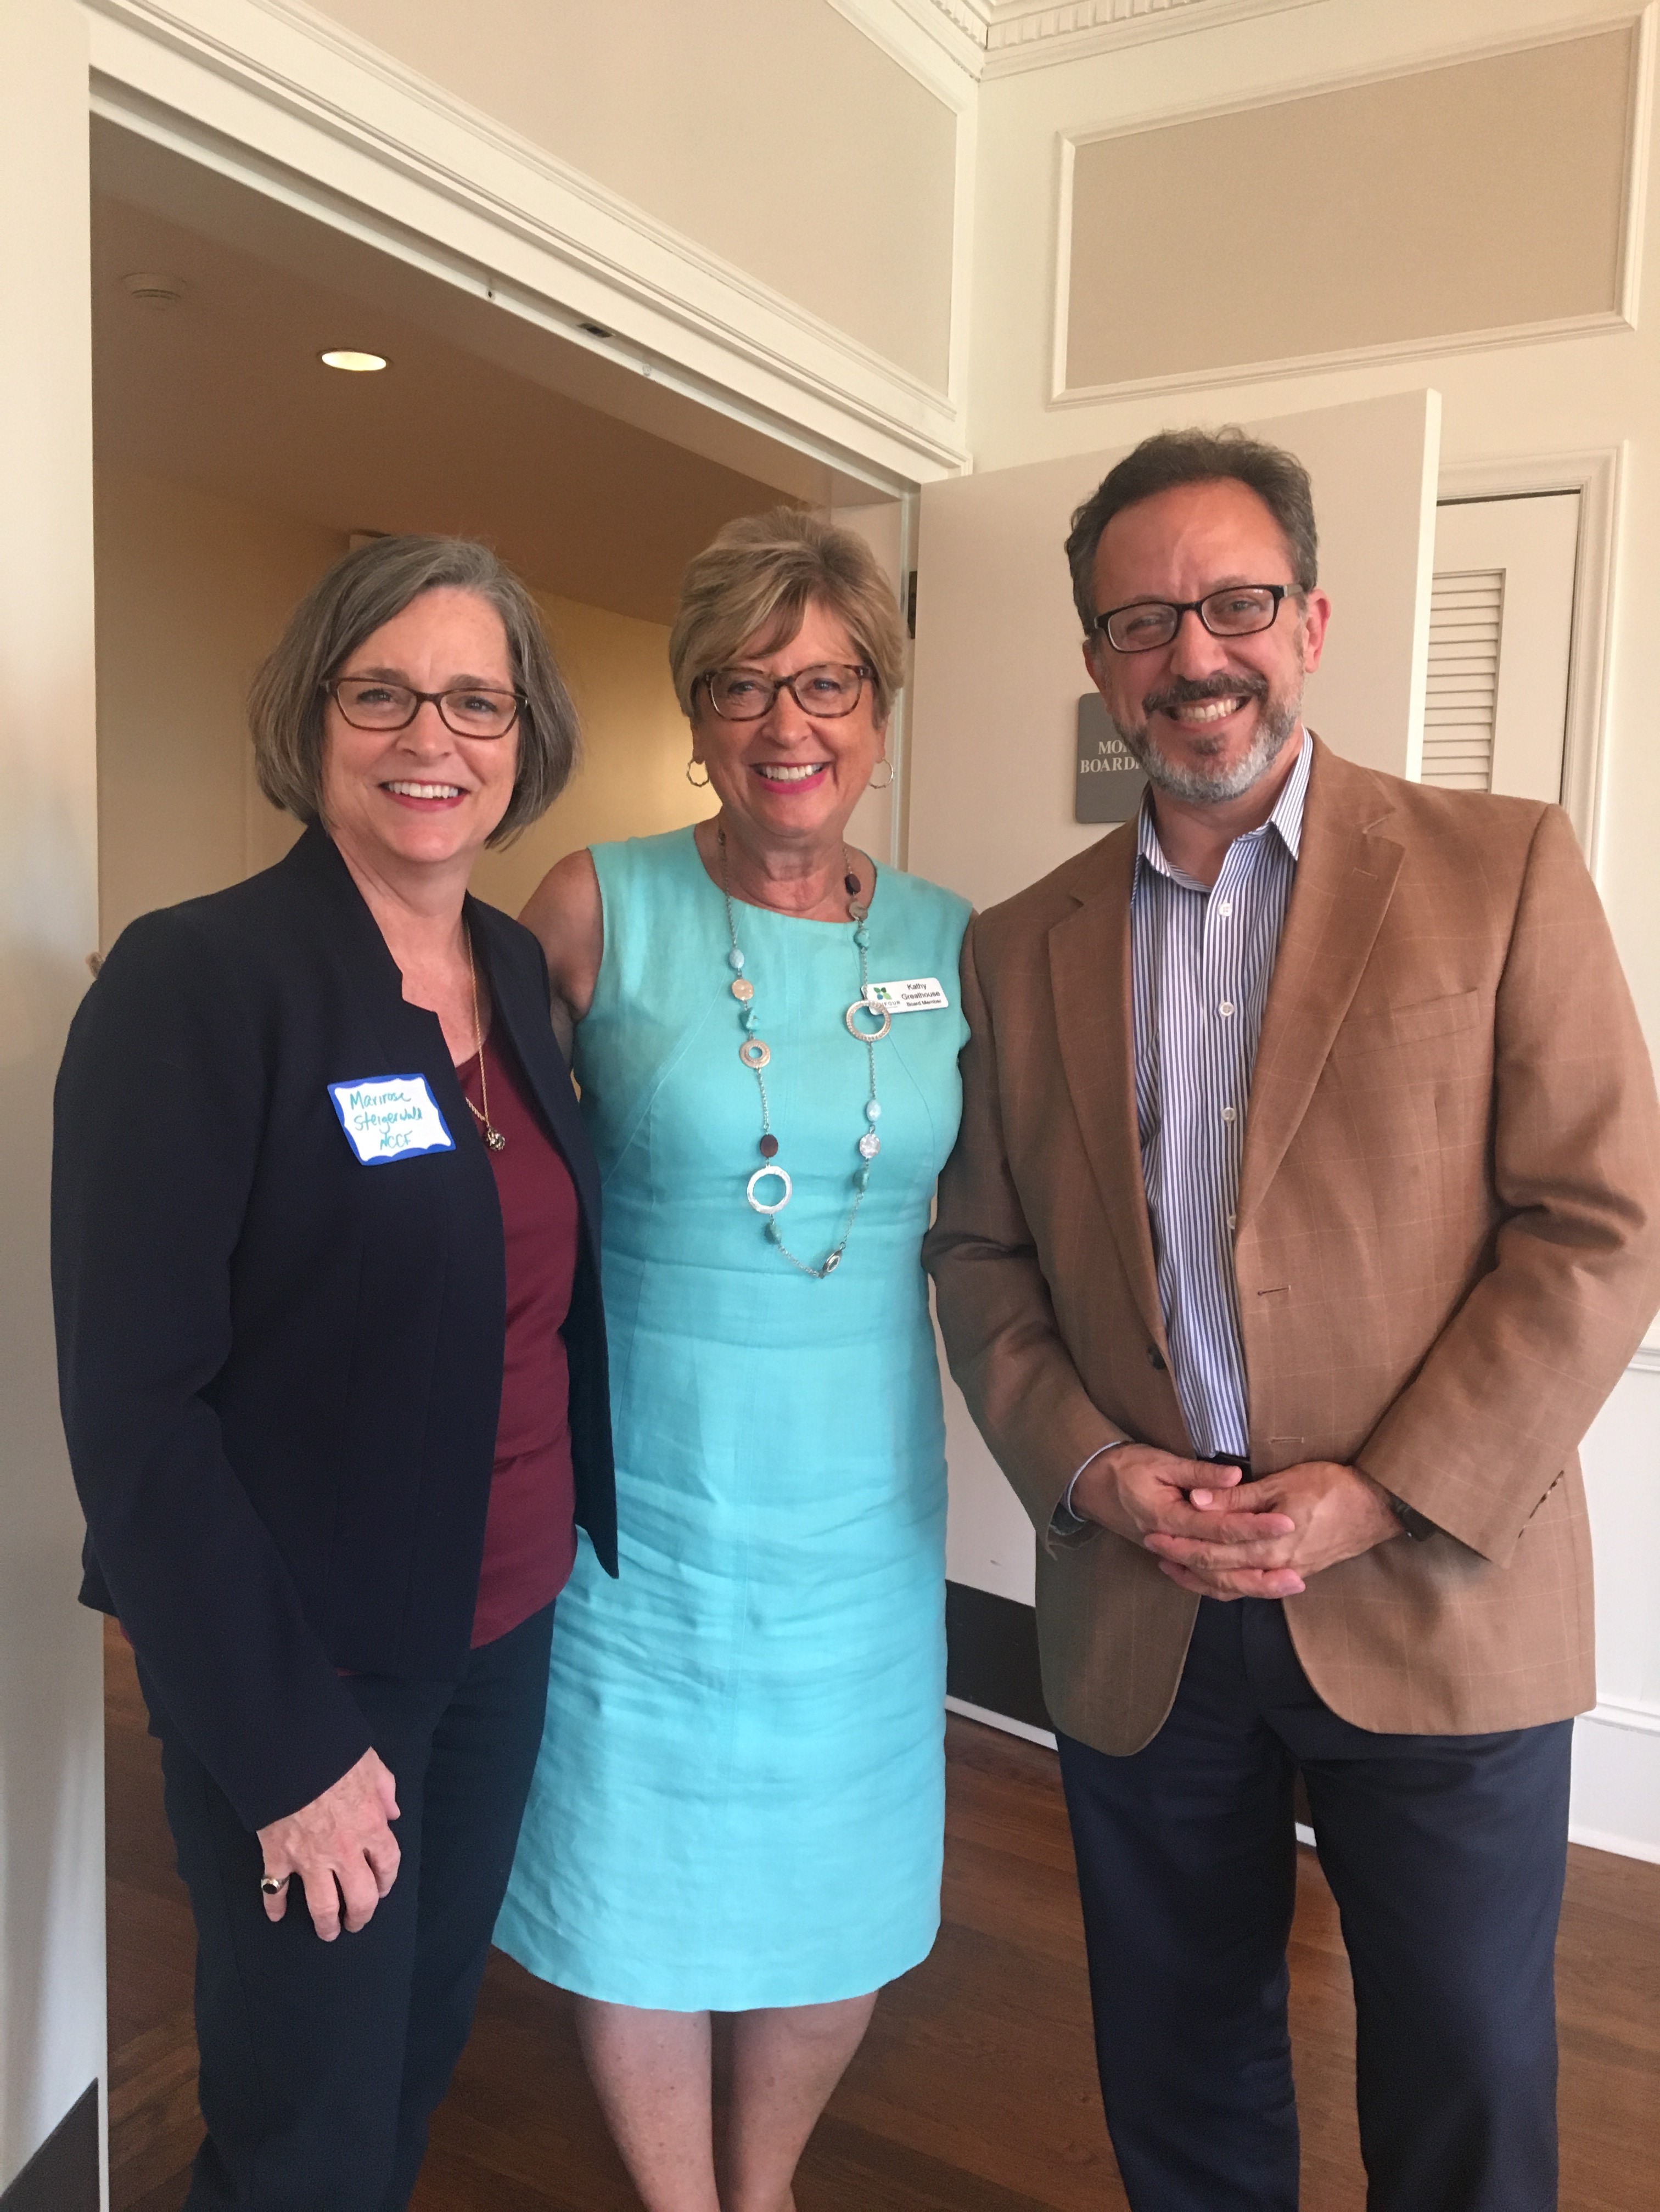 (From left to right) Marirose Steigerwald (NCCF director of operations), Kathy Greathouse (Unifour board) and Alan Jackson (Footcandle Film Society)